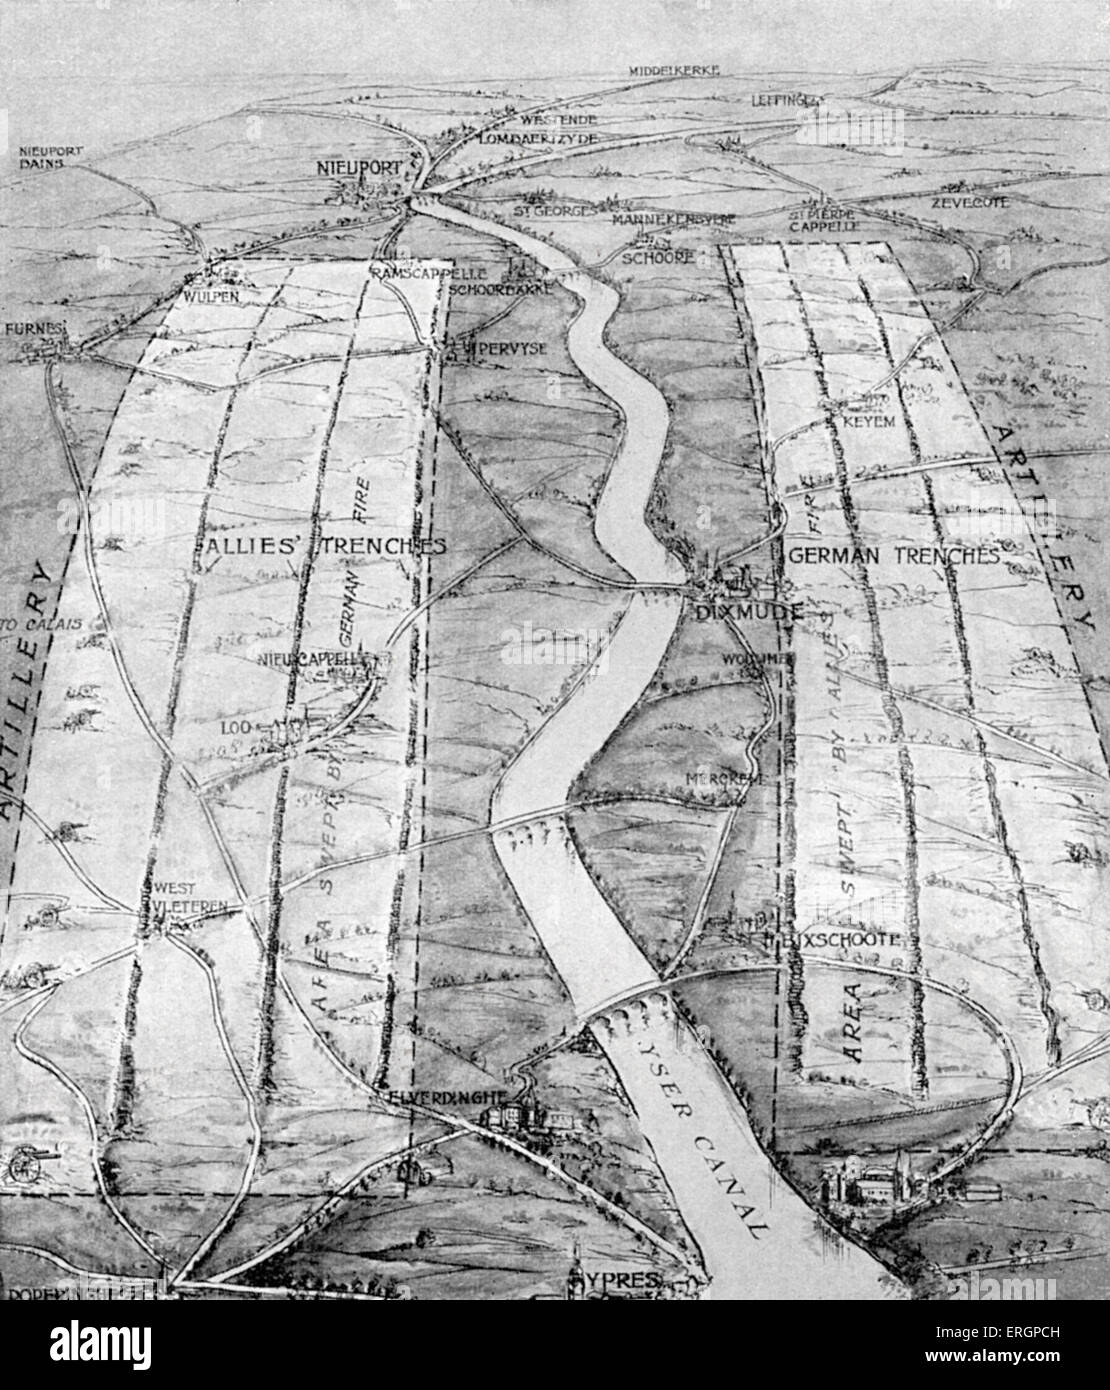 Map showing the deadlock between the Allied and German forces along the Yser canal, Stock Photo